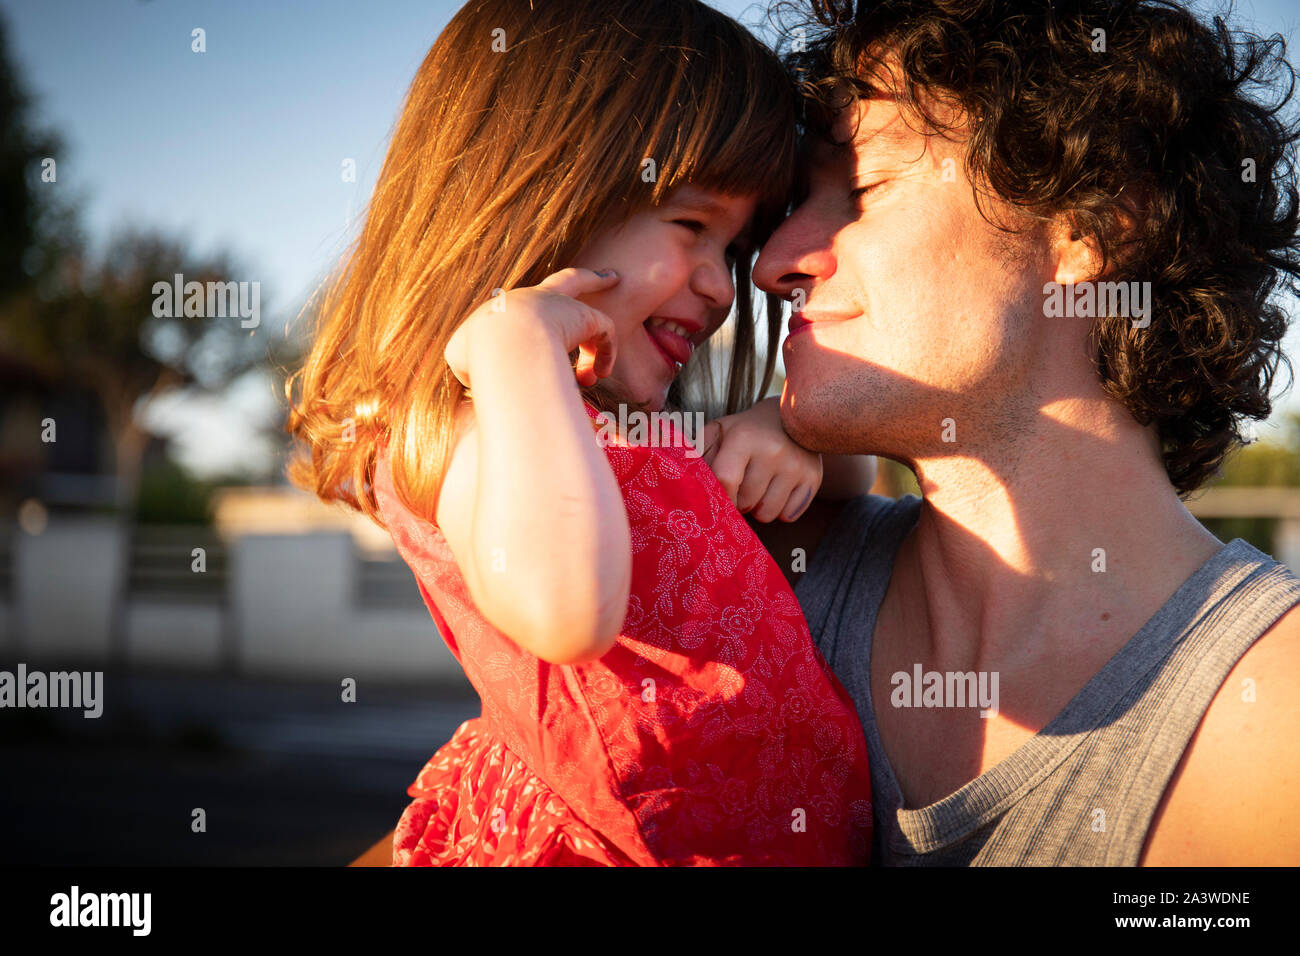 Young father laughing with his little daughter outdoor at sunset. The man is looking at the child and she is wearing a red dress. Copy space on the le Stock Photo